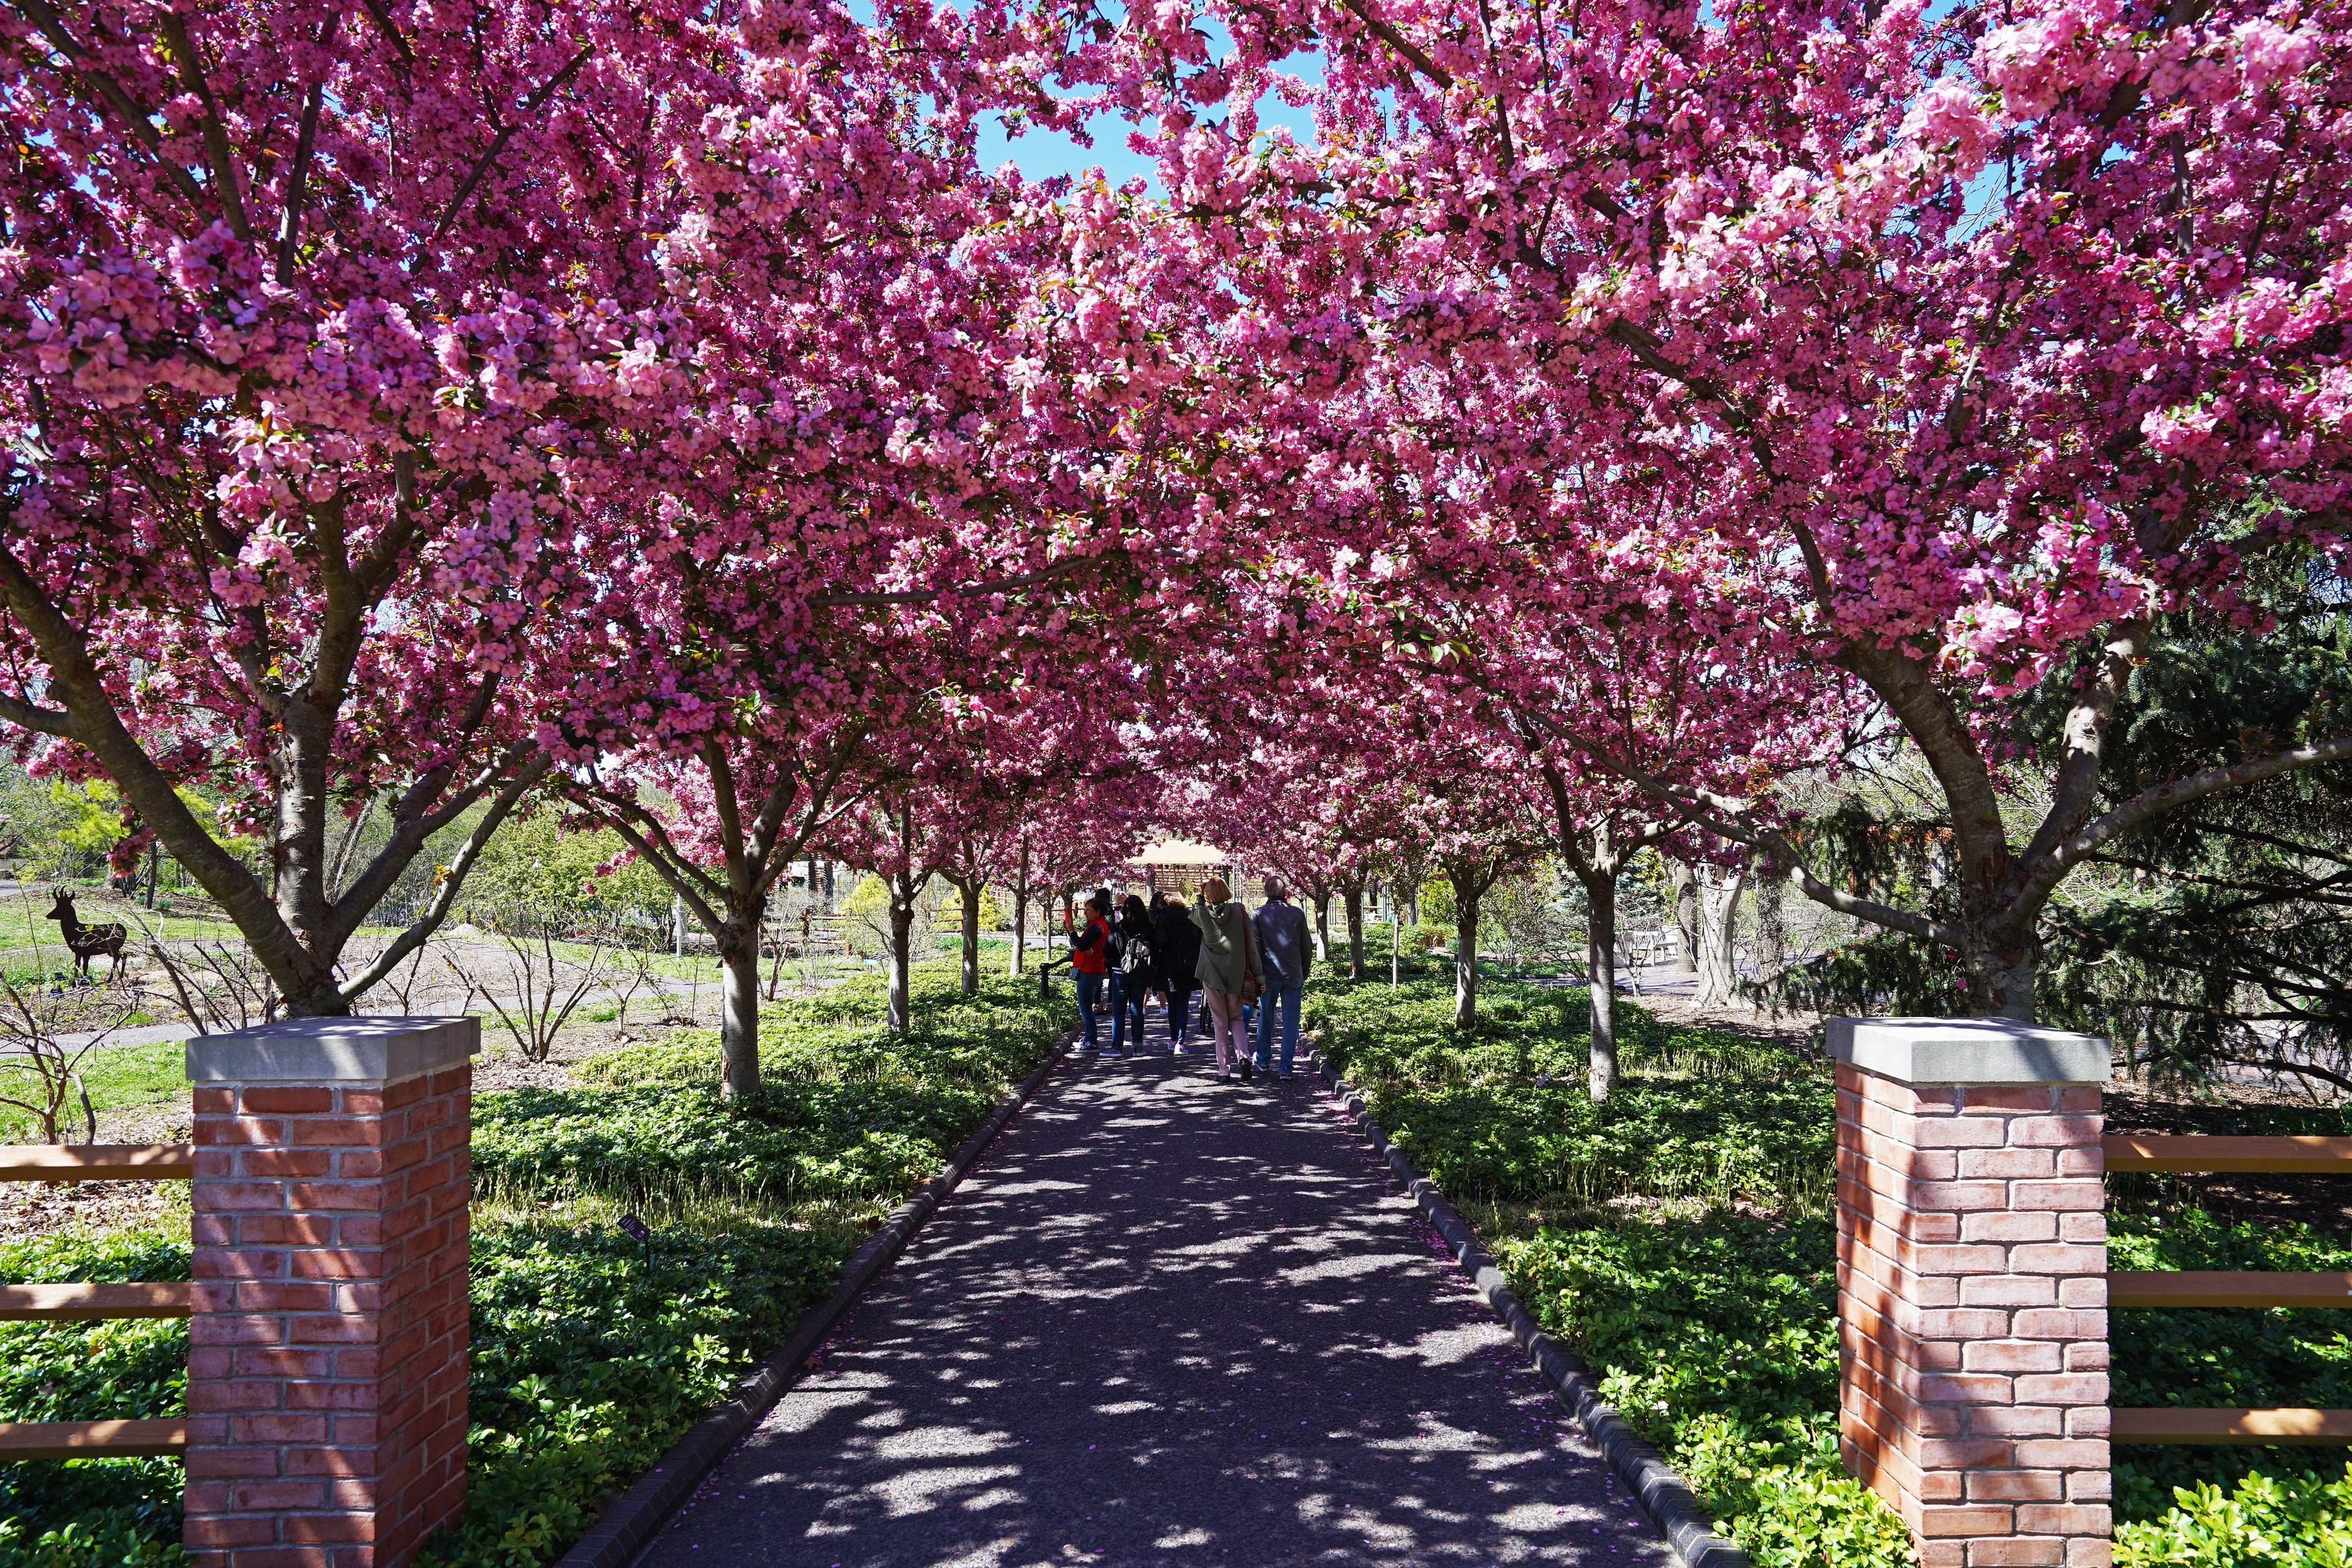 Cherry blossoms: It's nearly time to head to Washington